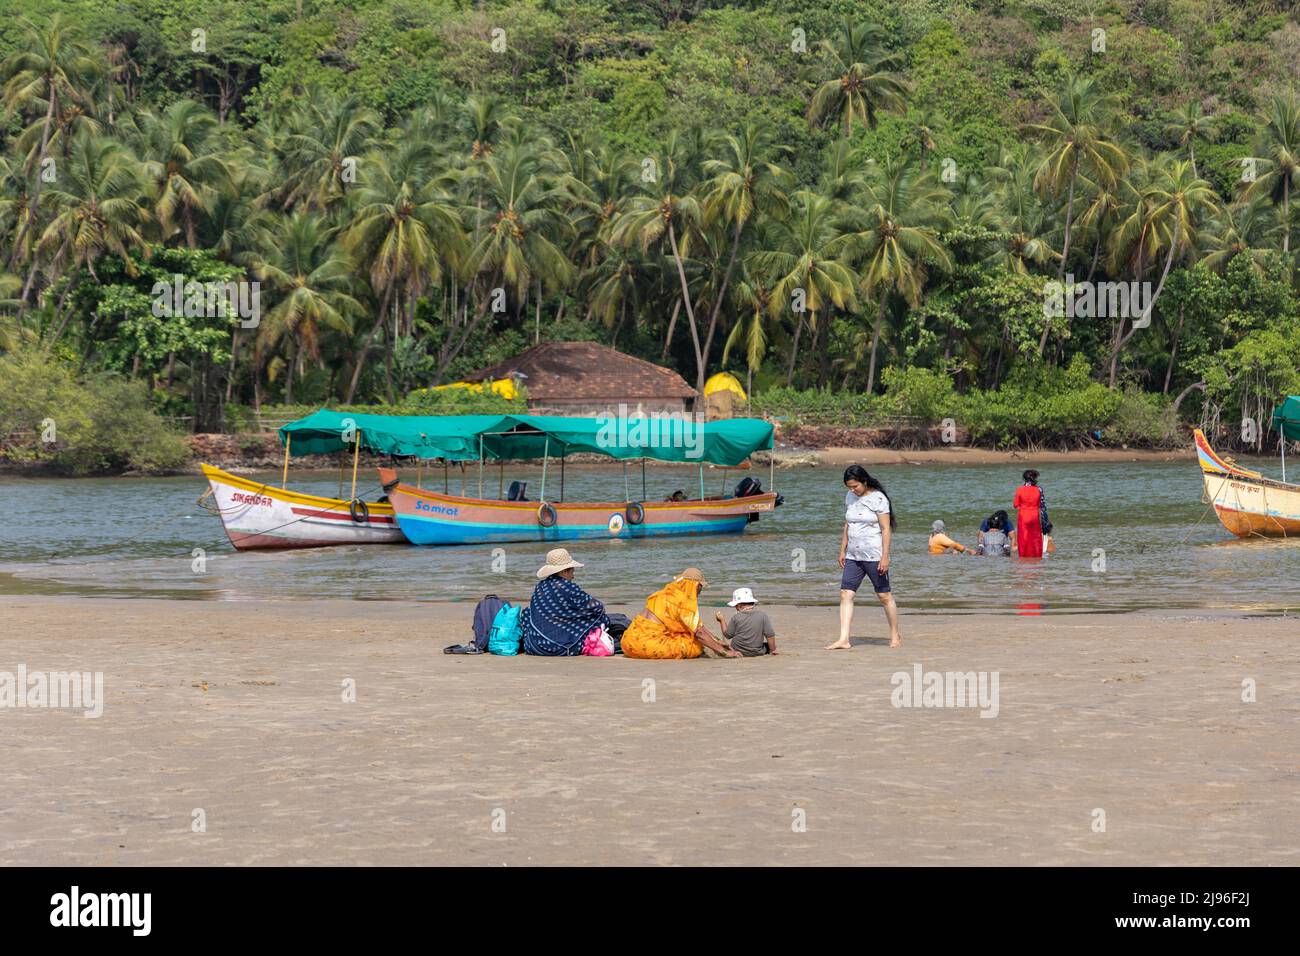 View of tourists enjoying water sports and other activities on Tsunami Island in the middle of Karli River Stock Photo